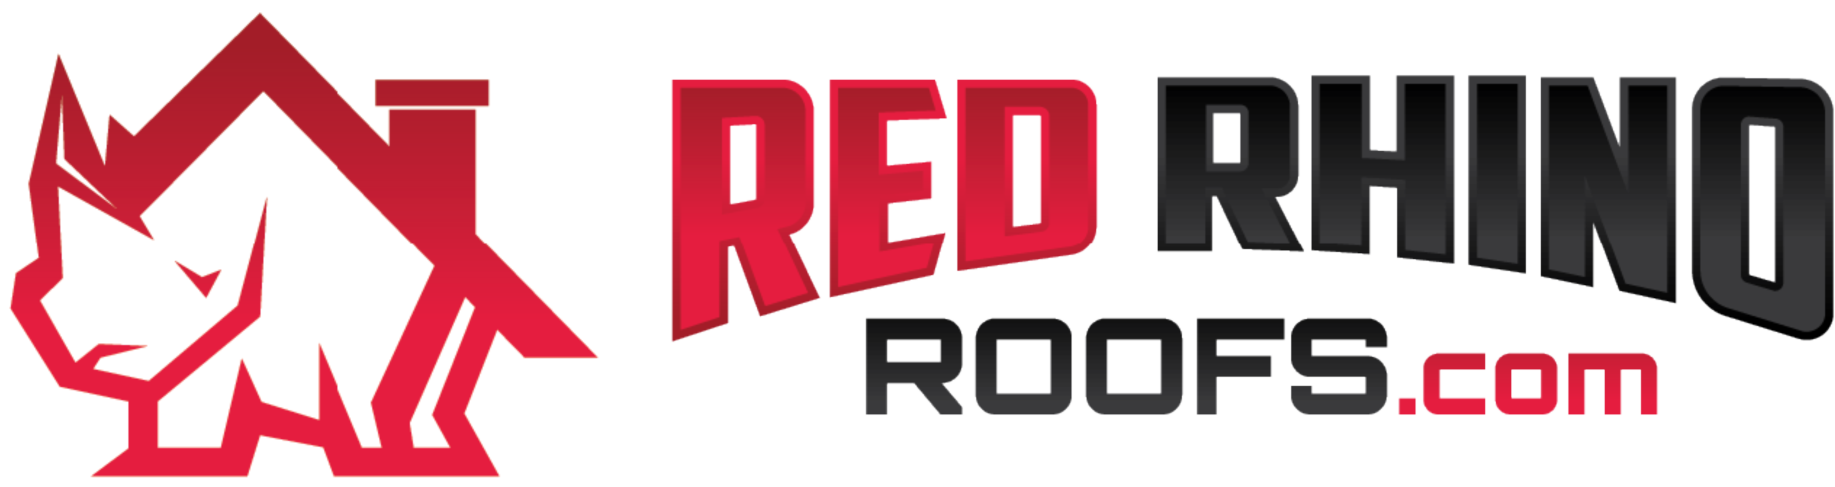 Red Rhino Roofing